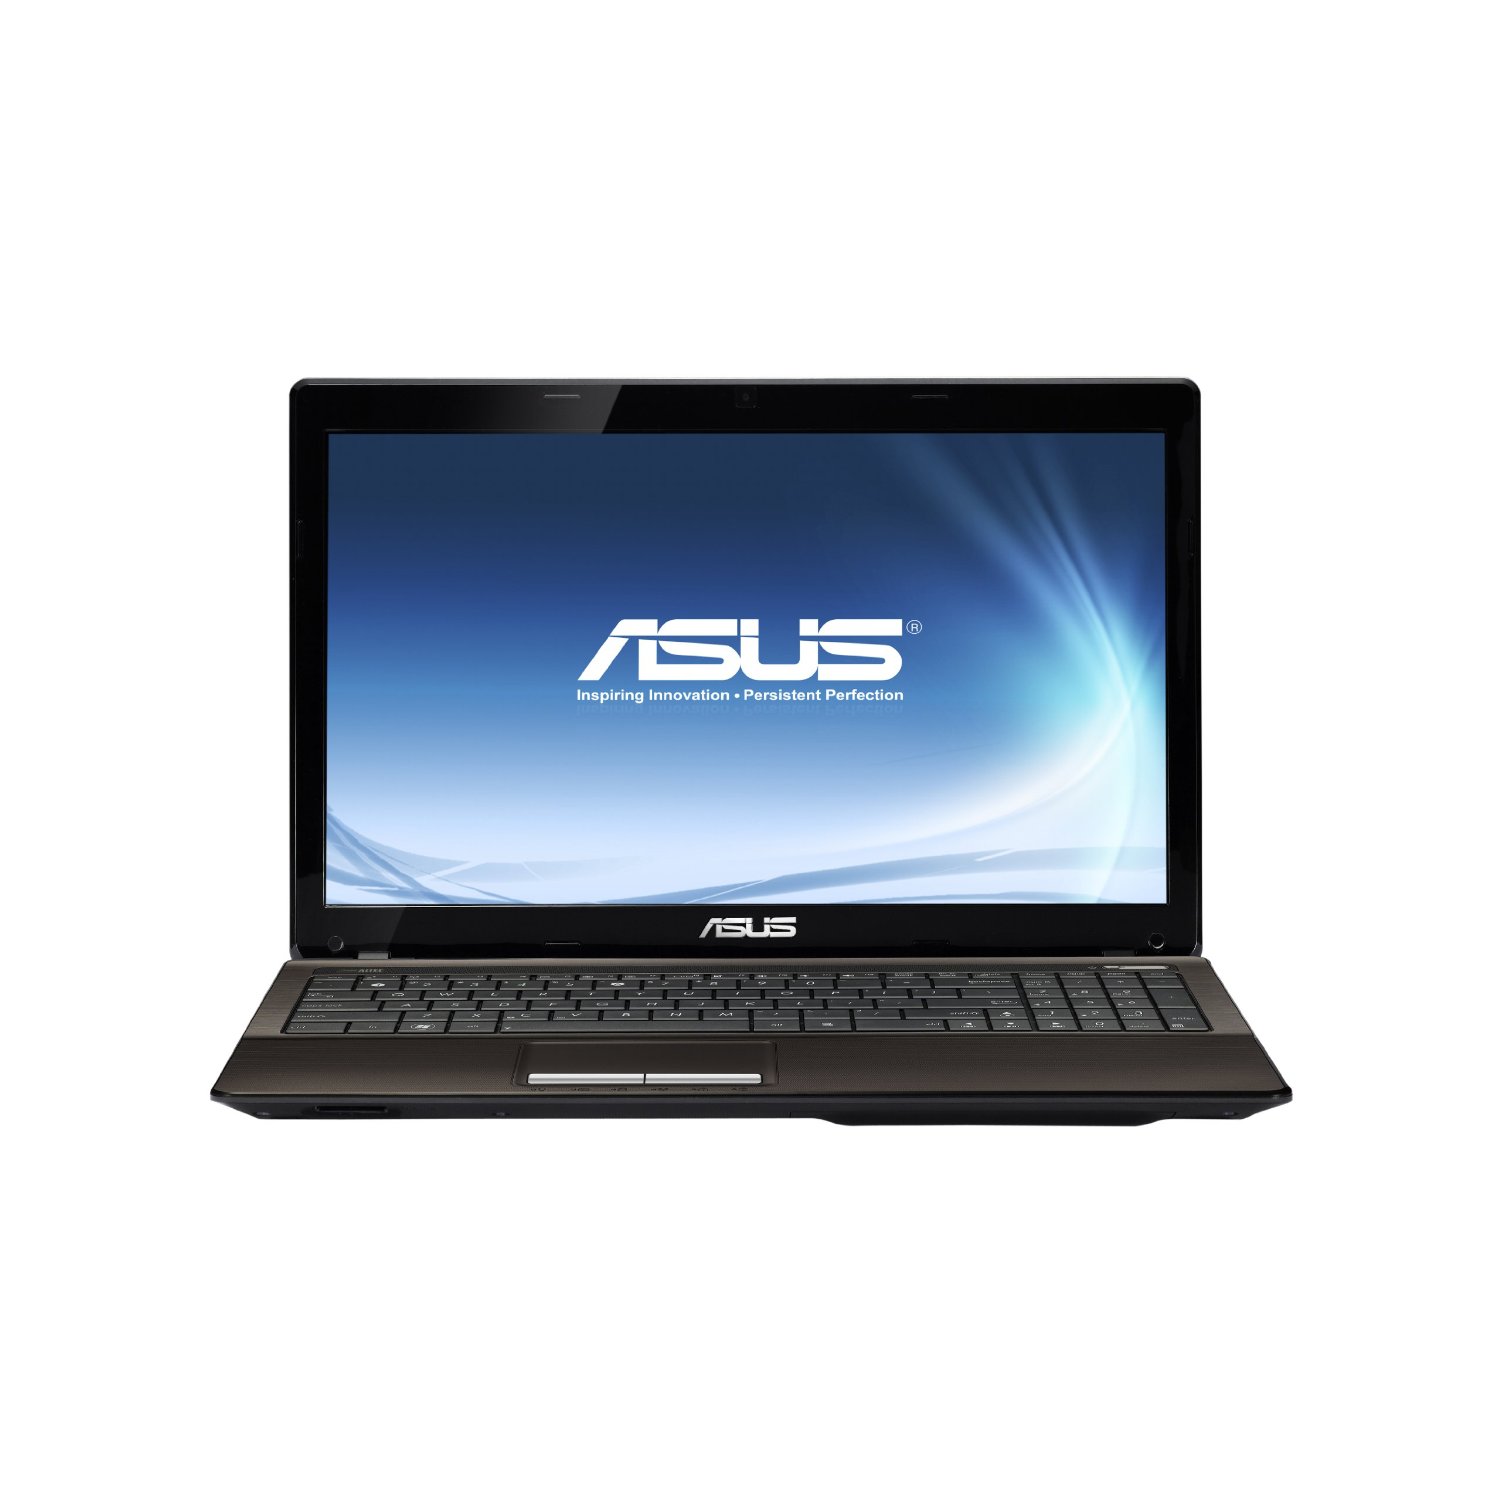 http://thetechjournal.com/wp-content/uploads/images/1203/1332652603-asus-a53ues01-156inch-laptop-1.jpg